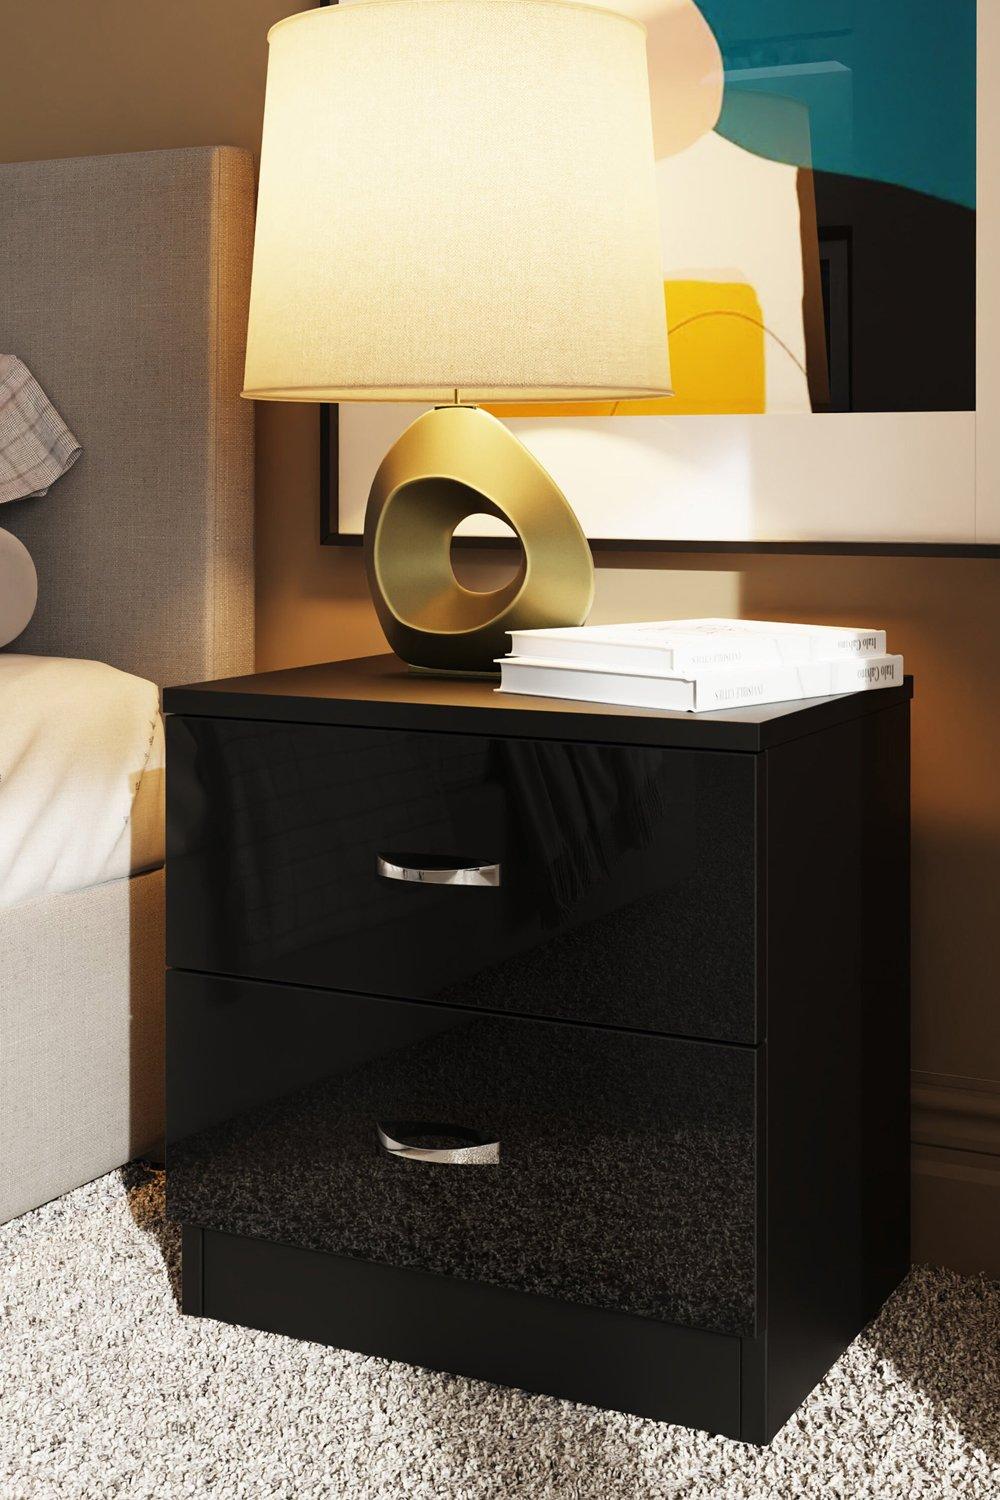 FWStyle 2 Drawer High Gloss Black Bedside Chest